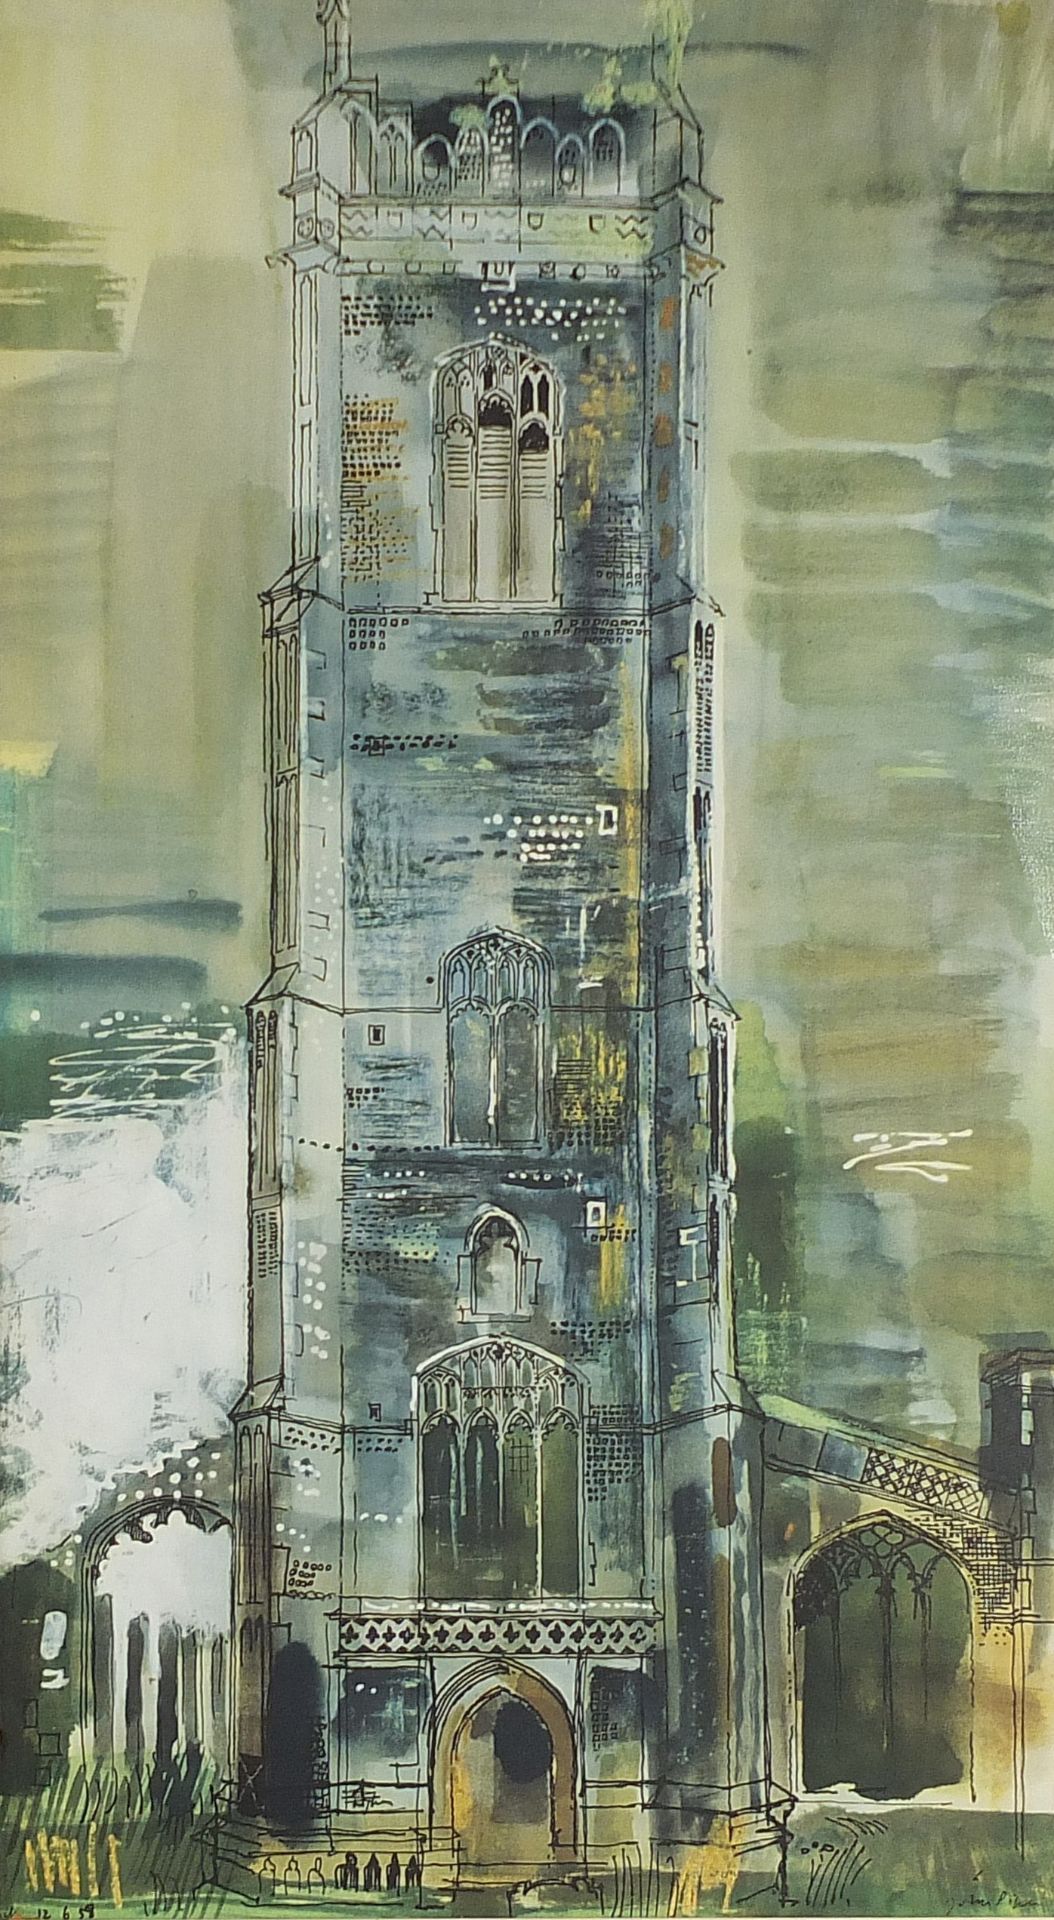 After John Piper - Walberswick Tower 1958, vintage print in colour, mounted, framed and glazed, 68.